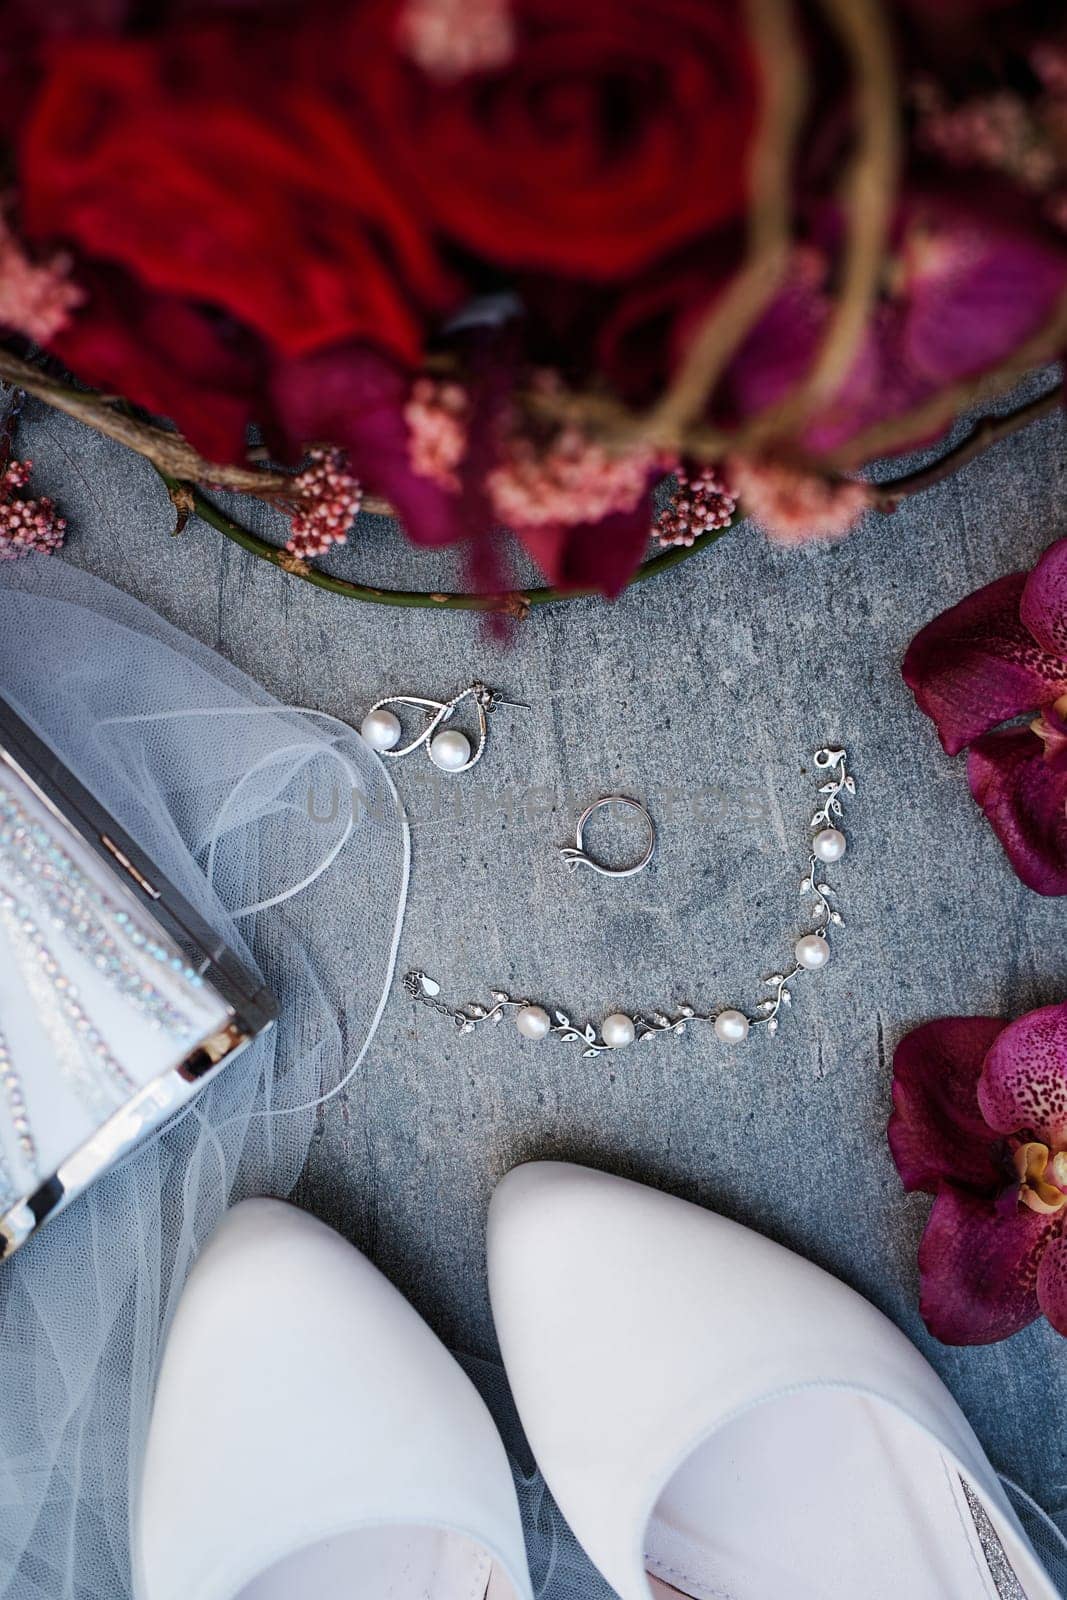 Pearl earrings and a bracelet lie next to the wedding ring on the table. Top view by Nadtochiy